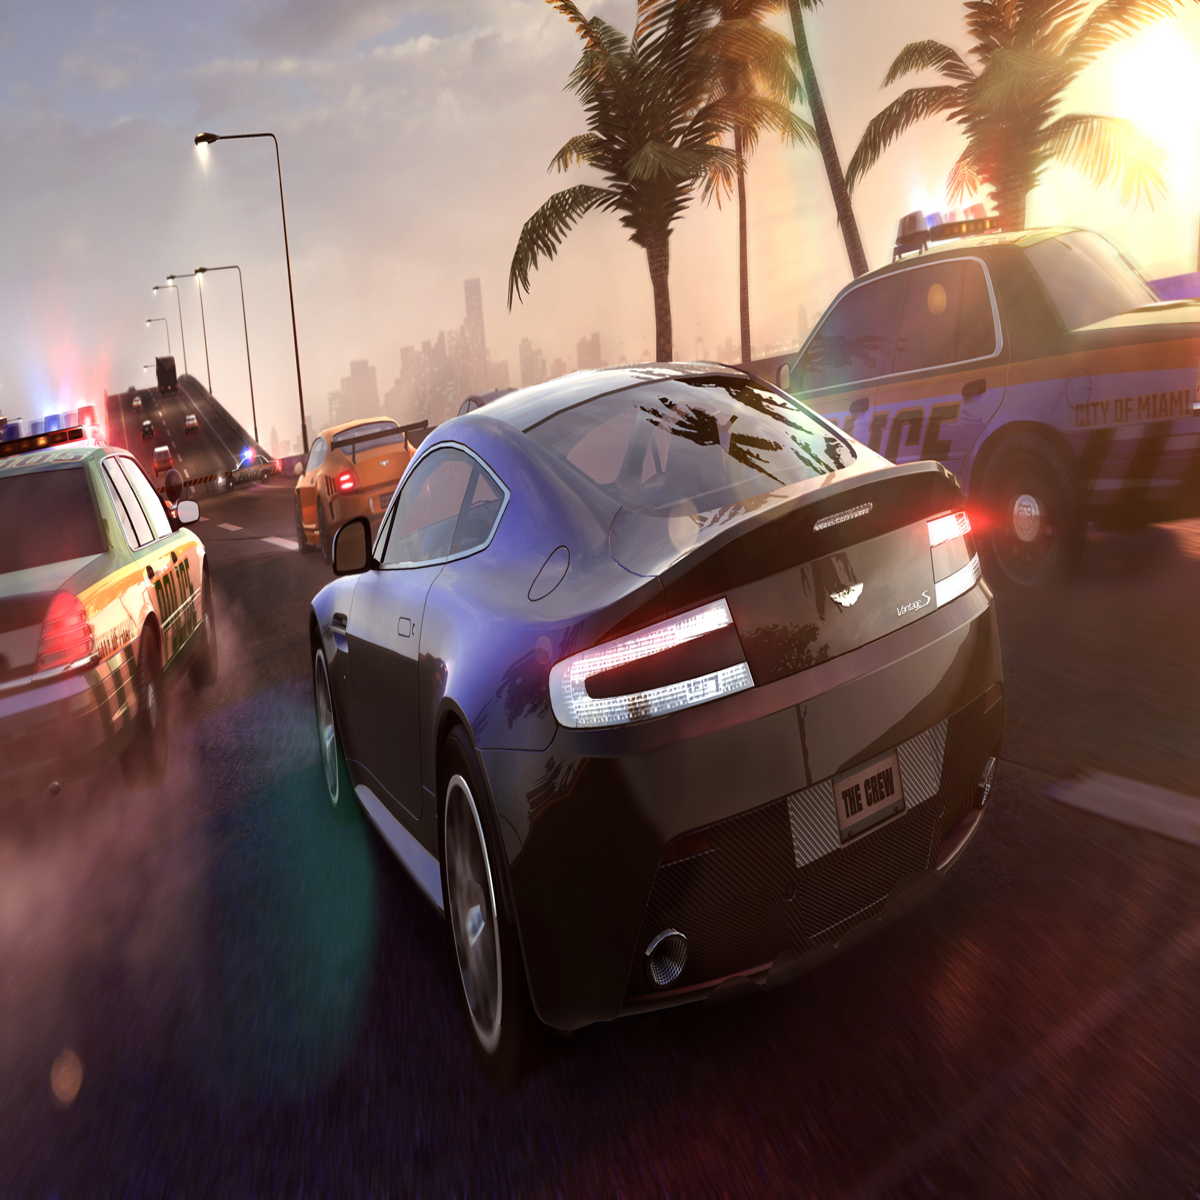 The Crew has been delisted from digital stores! The servers will